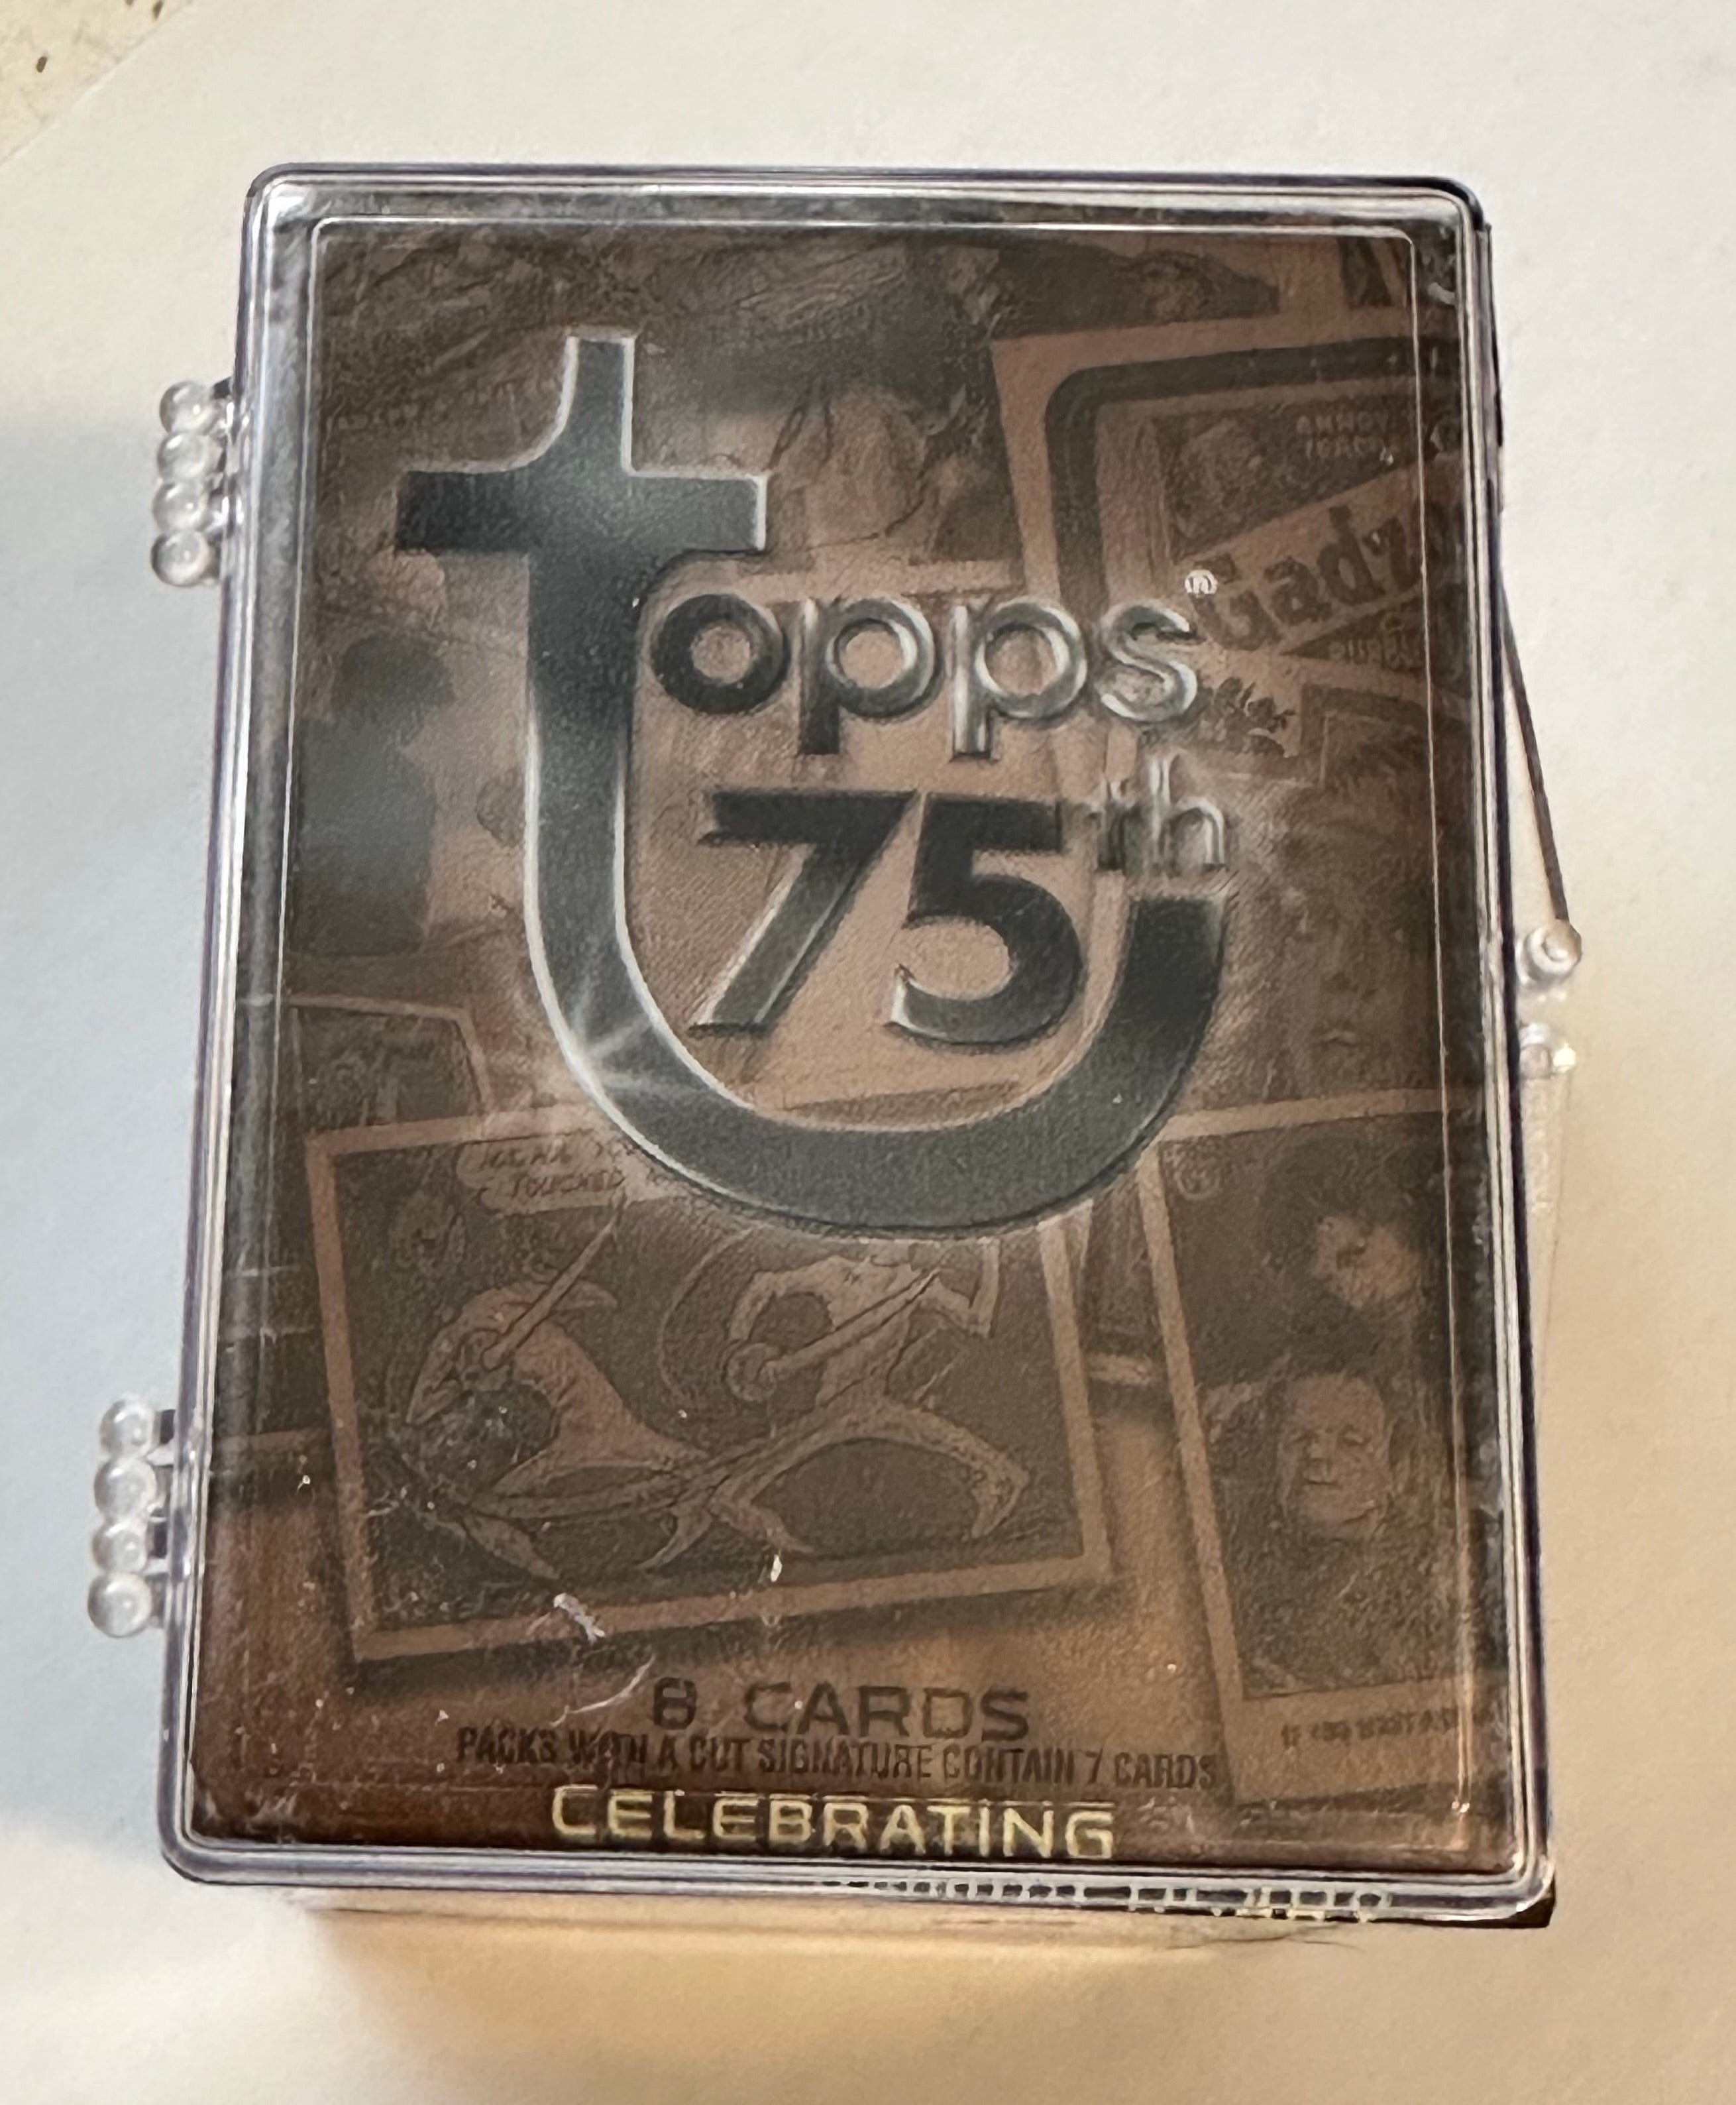 Topps 75th anniversary cards set 2013